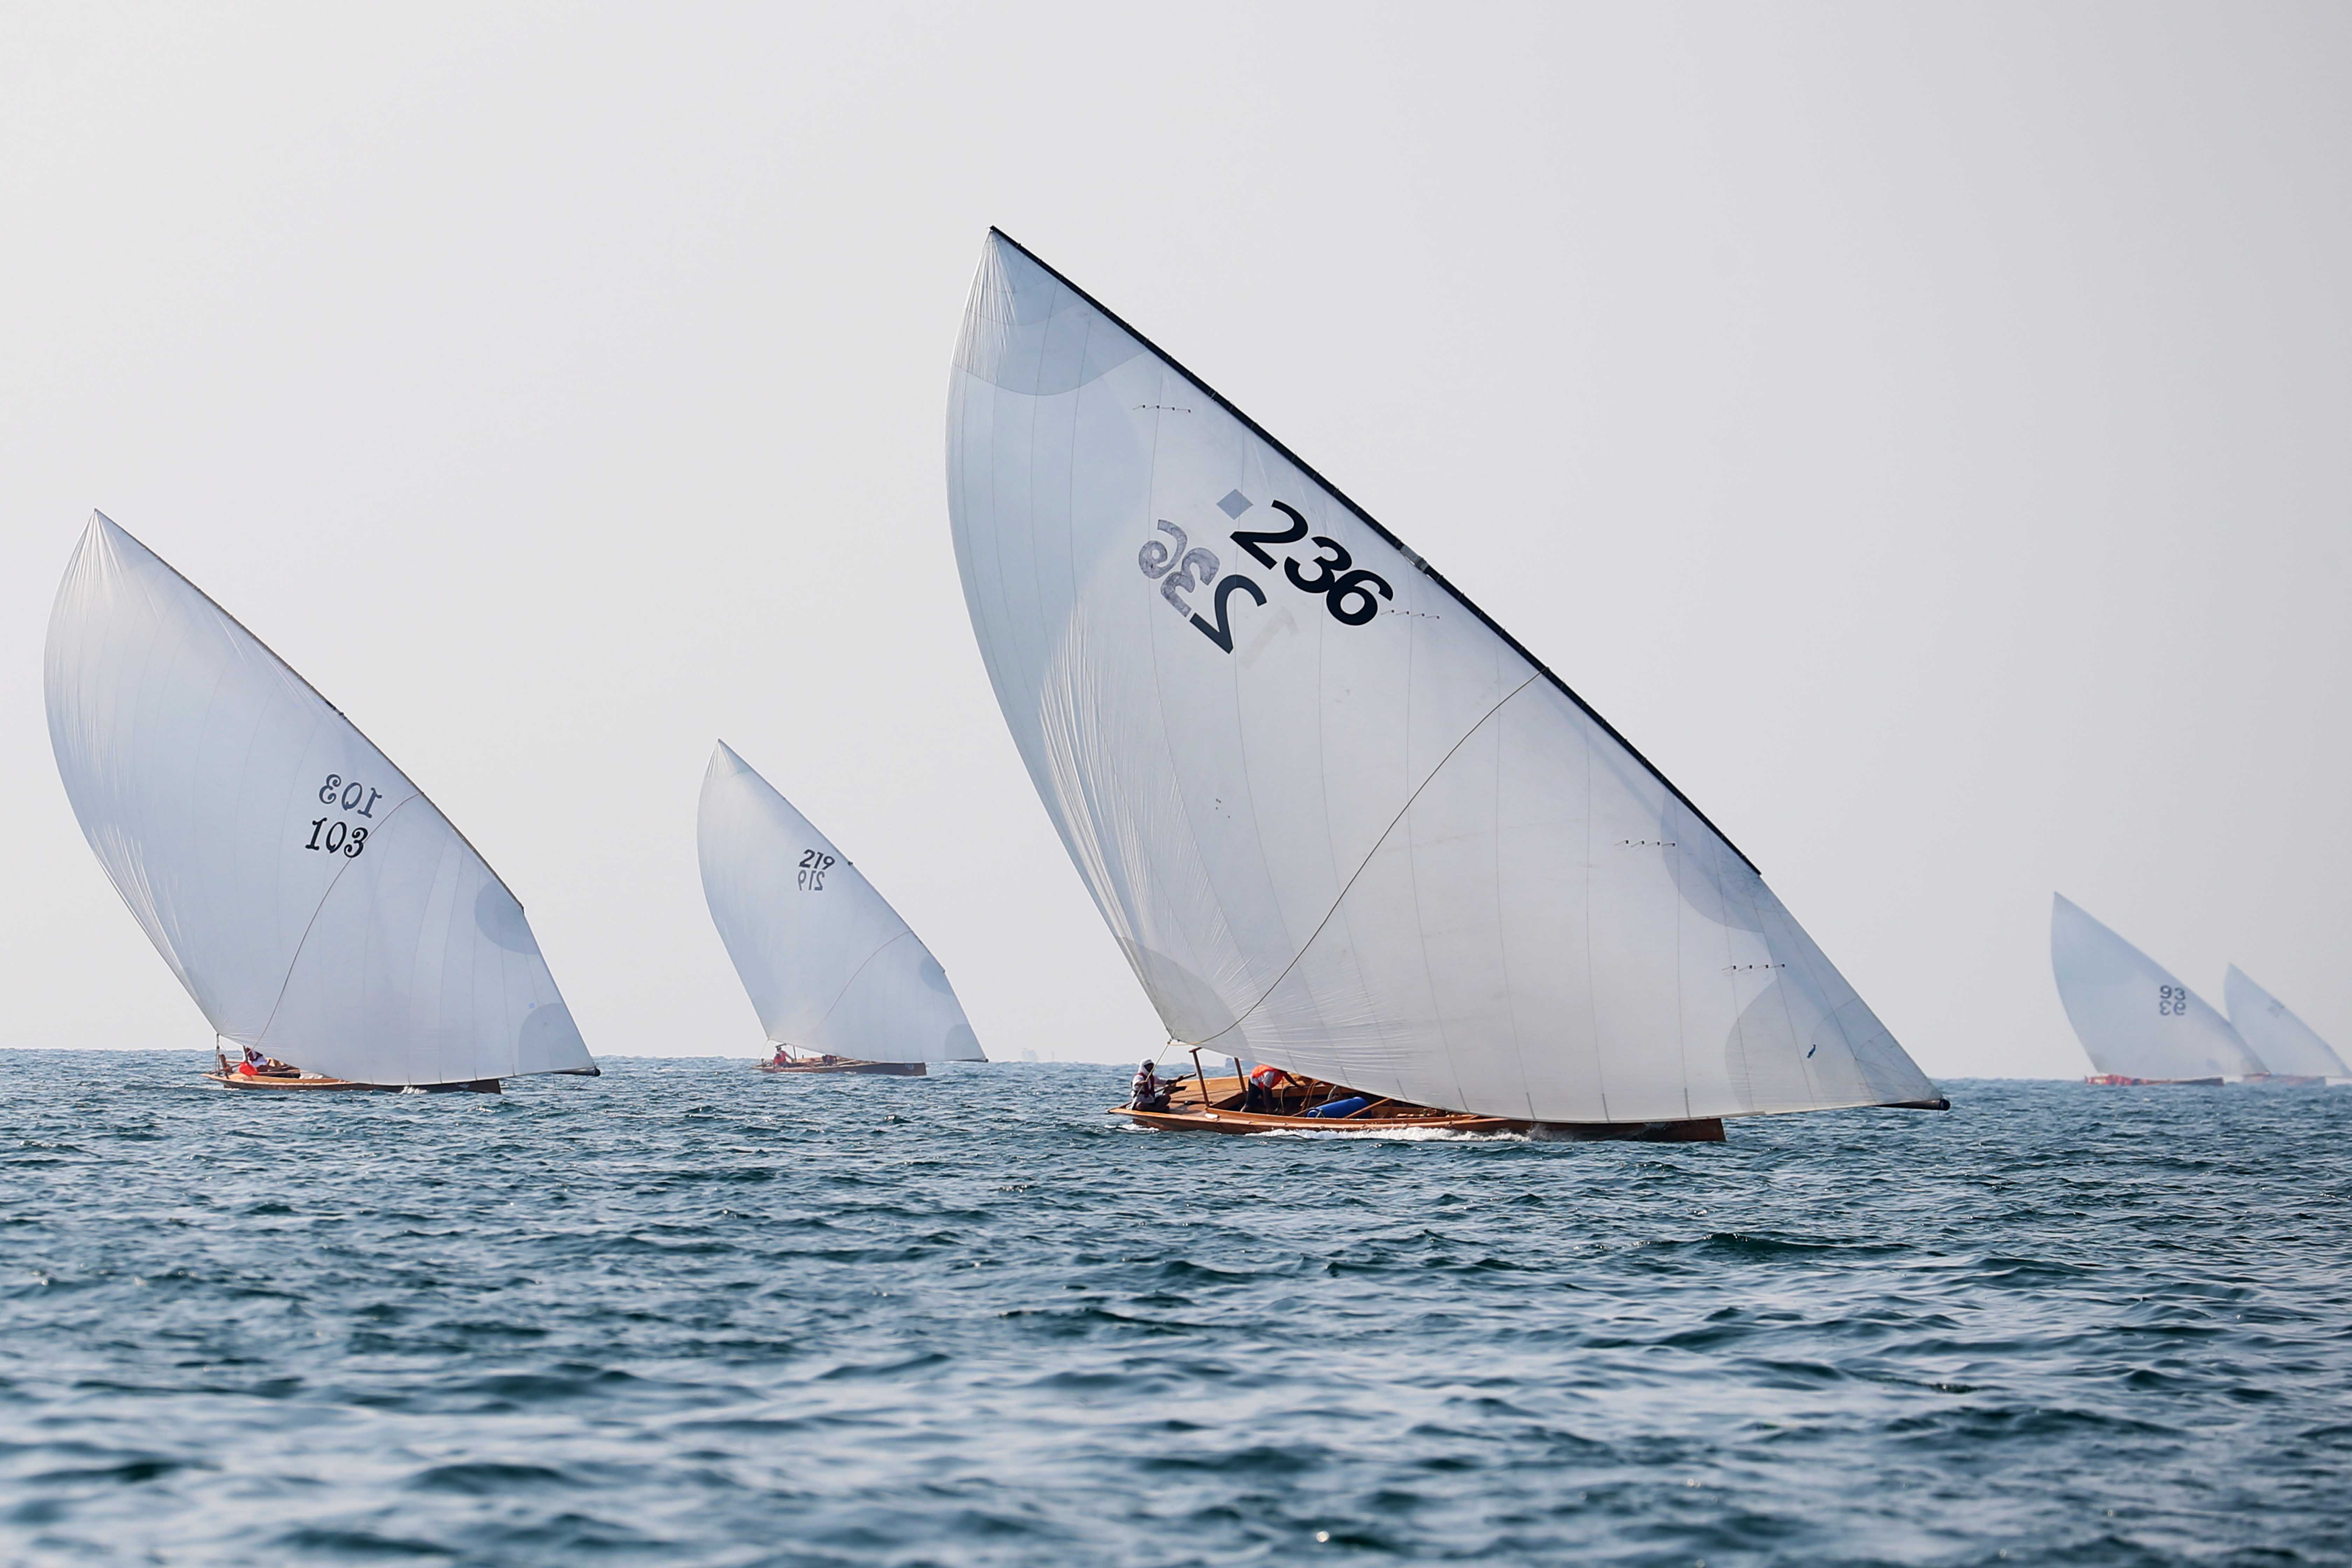 Registration Closes today for the Second Round of 43ft Dhow Sailing Race